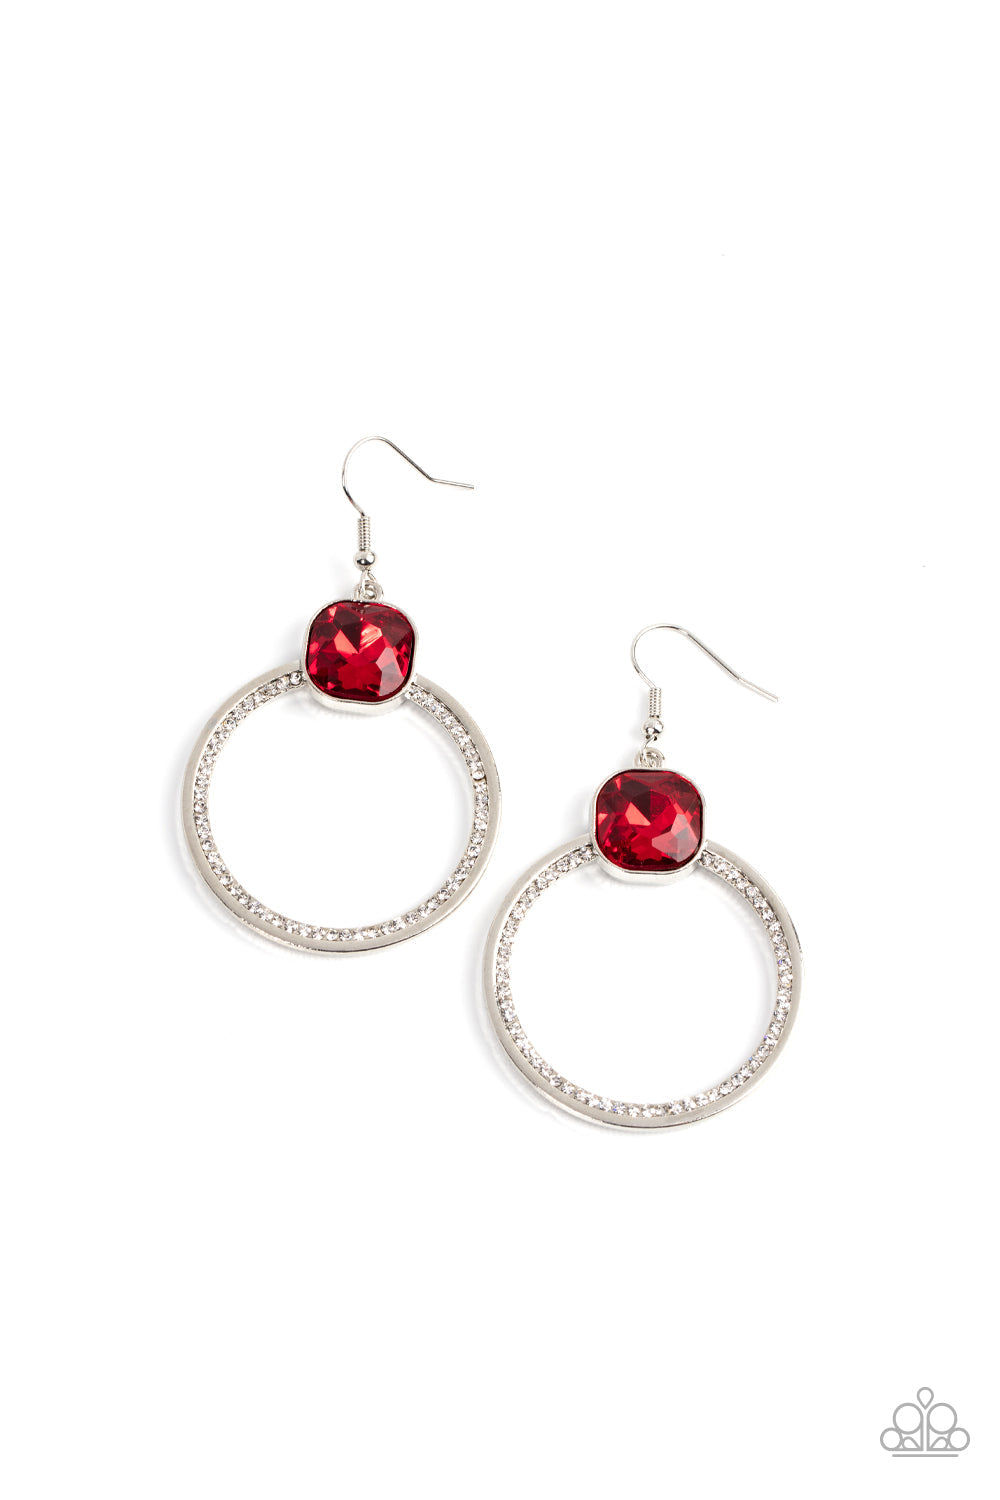 Cheers to Happily Ever After - Red Gem - Silver Earrings - Paparazzi Accessories - An oversized red gem sits atop a silver hoop with an inner ring encrusted in glitzy white rhinestones, resulting in a timeless twinkle. Earring attaches to a standard fishhook fitting.